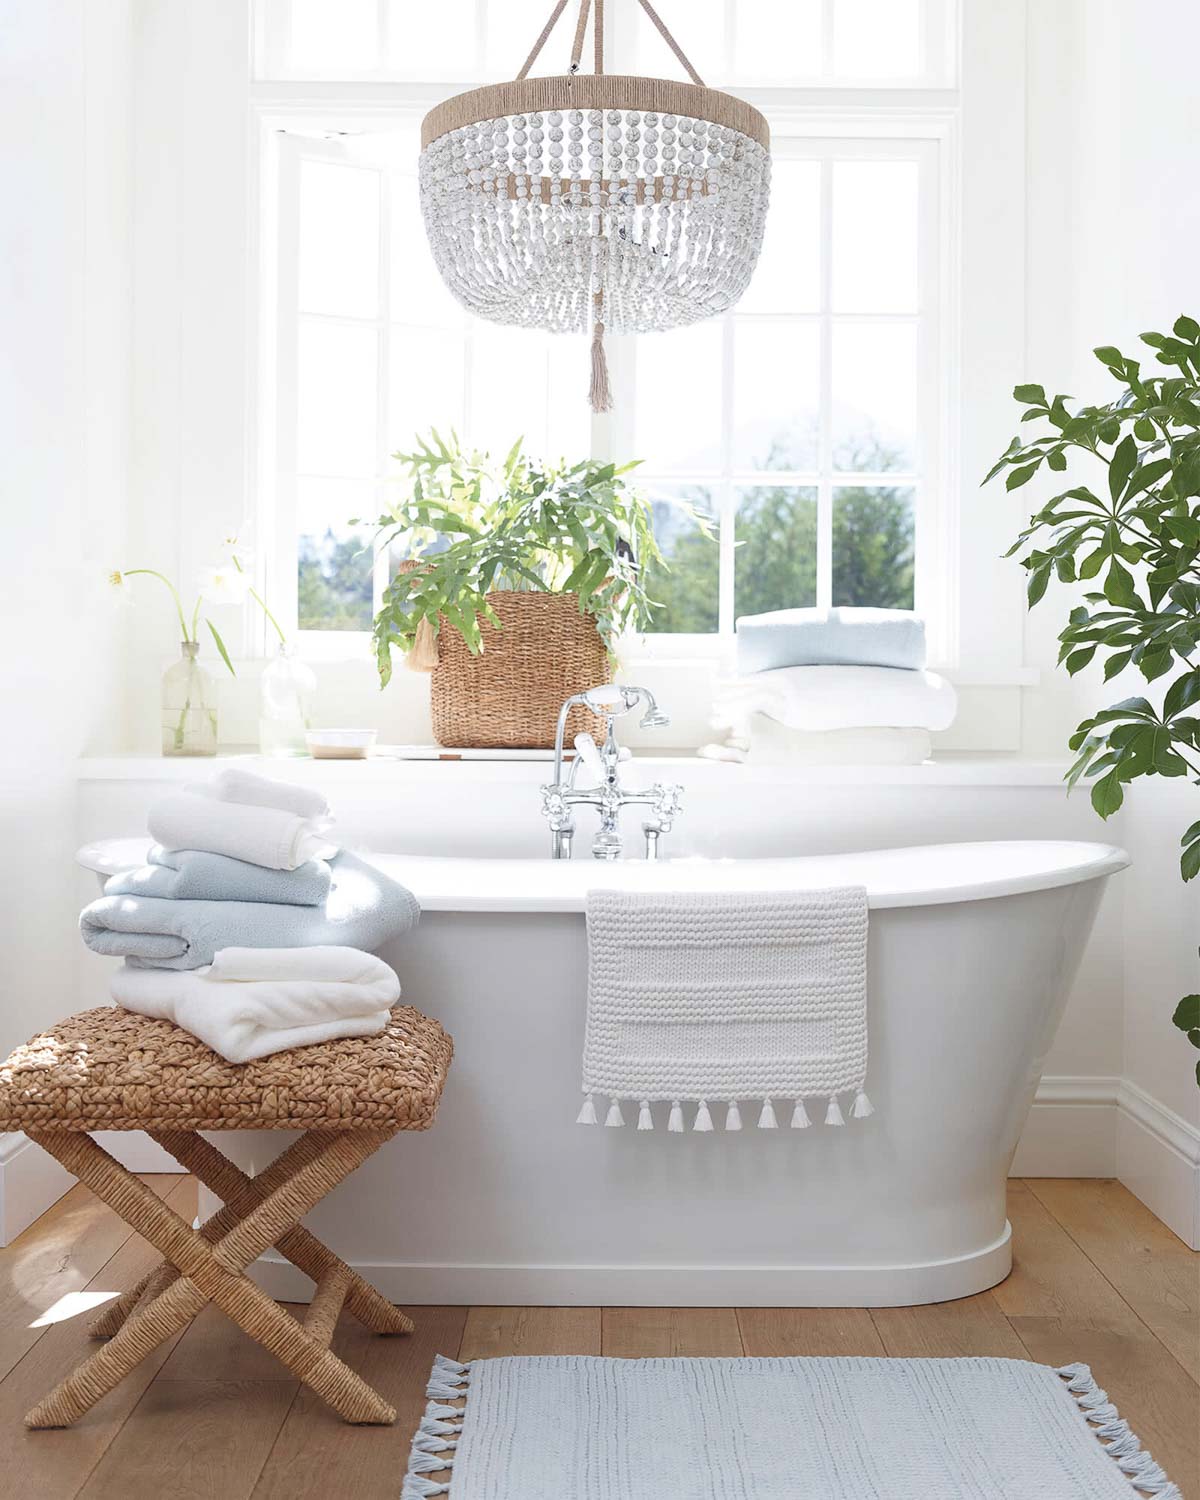 Bathroom with X-base stool in front of freestanding white tub